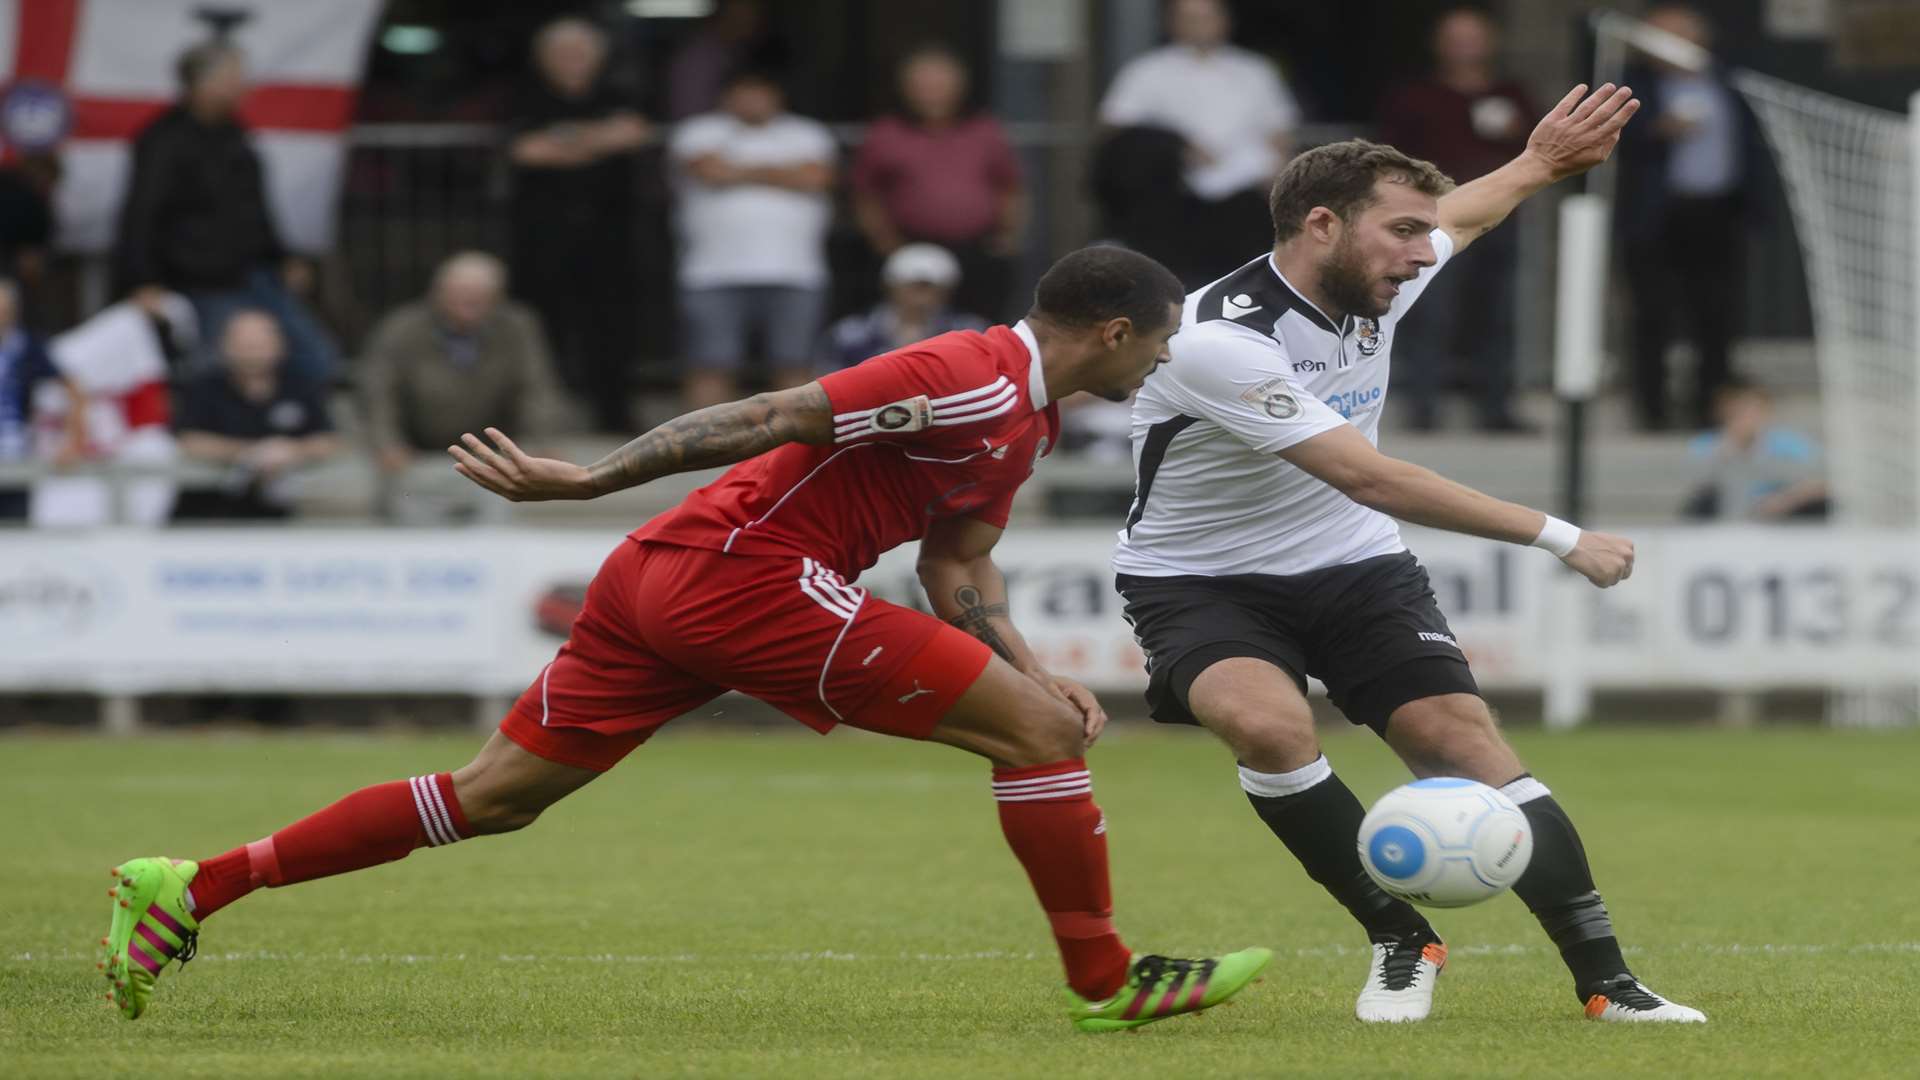 Ryan Hayes on the ball for Dartford against Hungerford Picture: Andy Payton